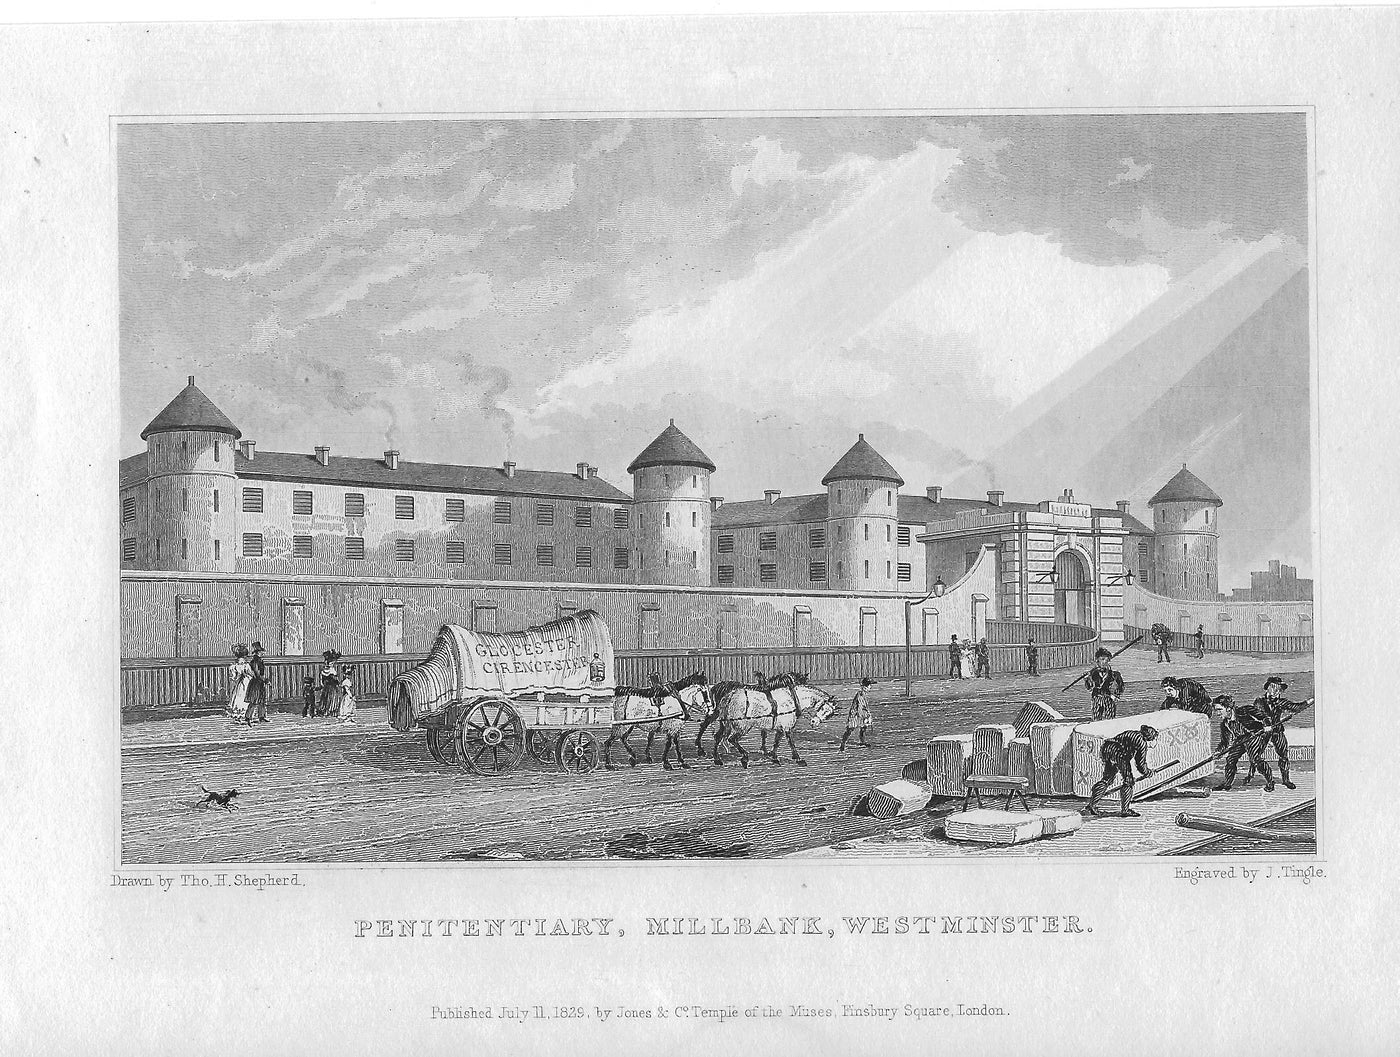 Millbank Penitentiary Westminster London antique print 1830.